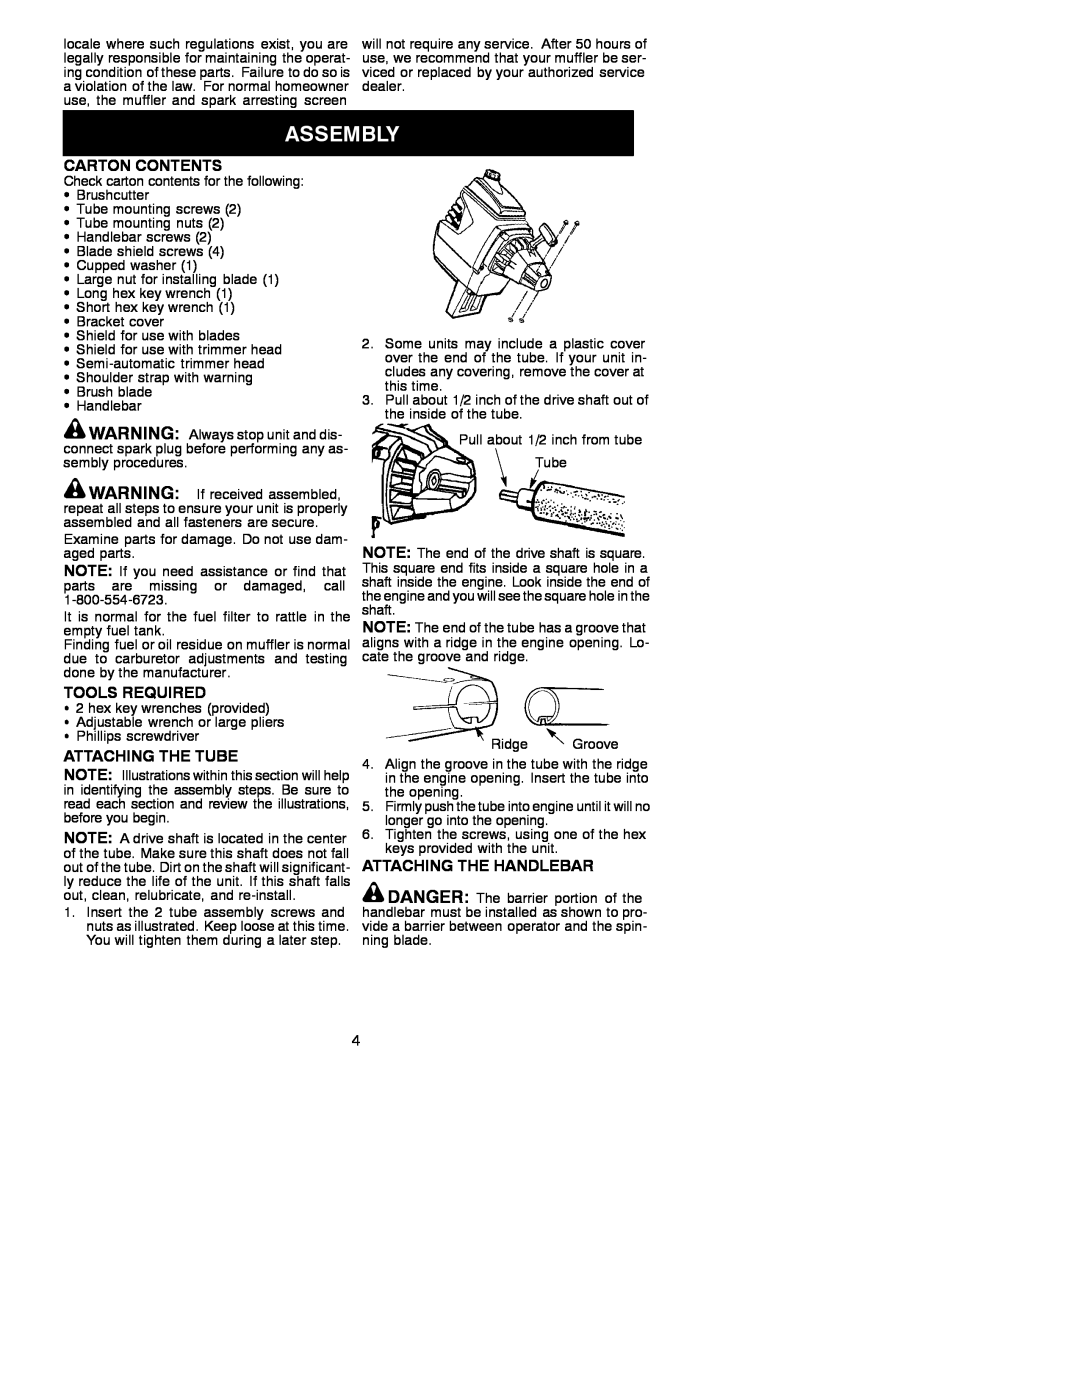 Weed Eater 530088132 instruction manual Carton Contents, Tools Required, Attaching The Tube, Attaching The Handlebar 